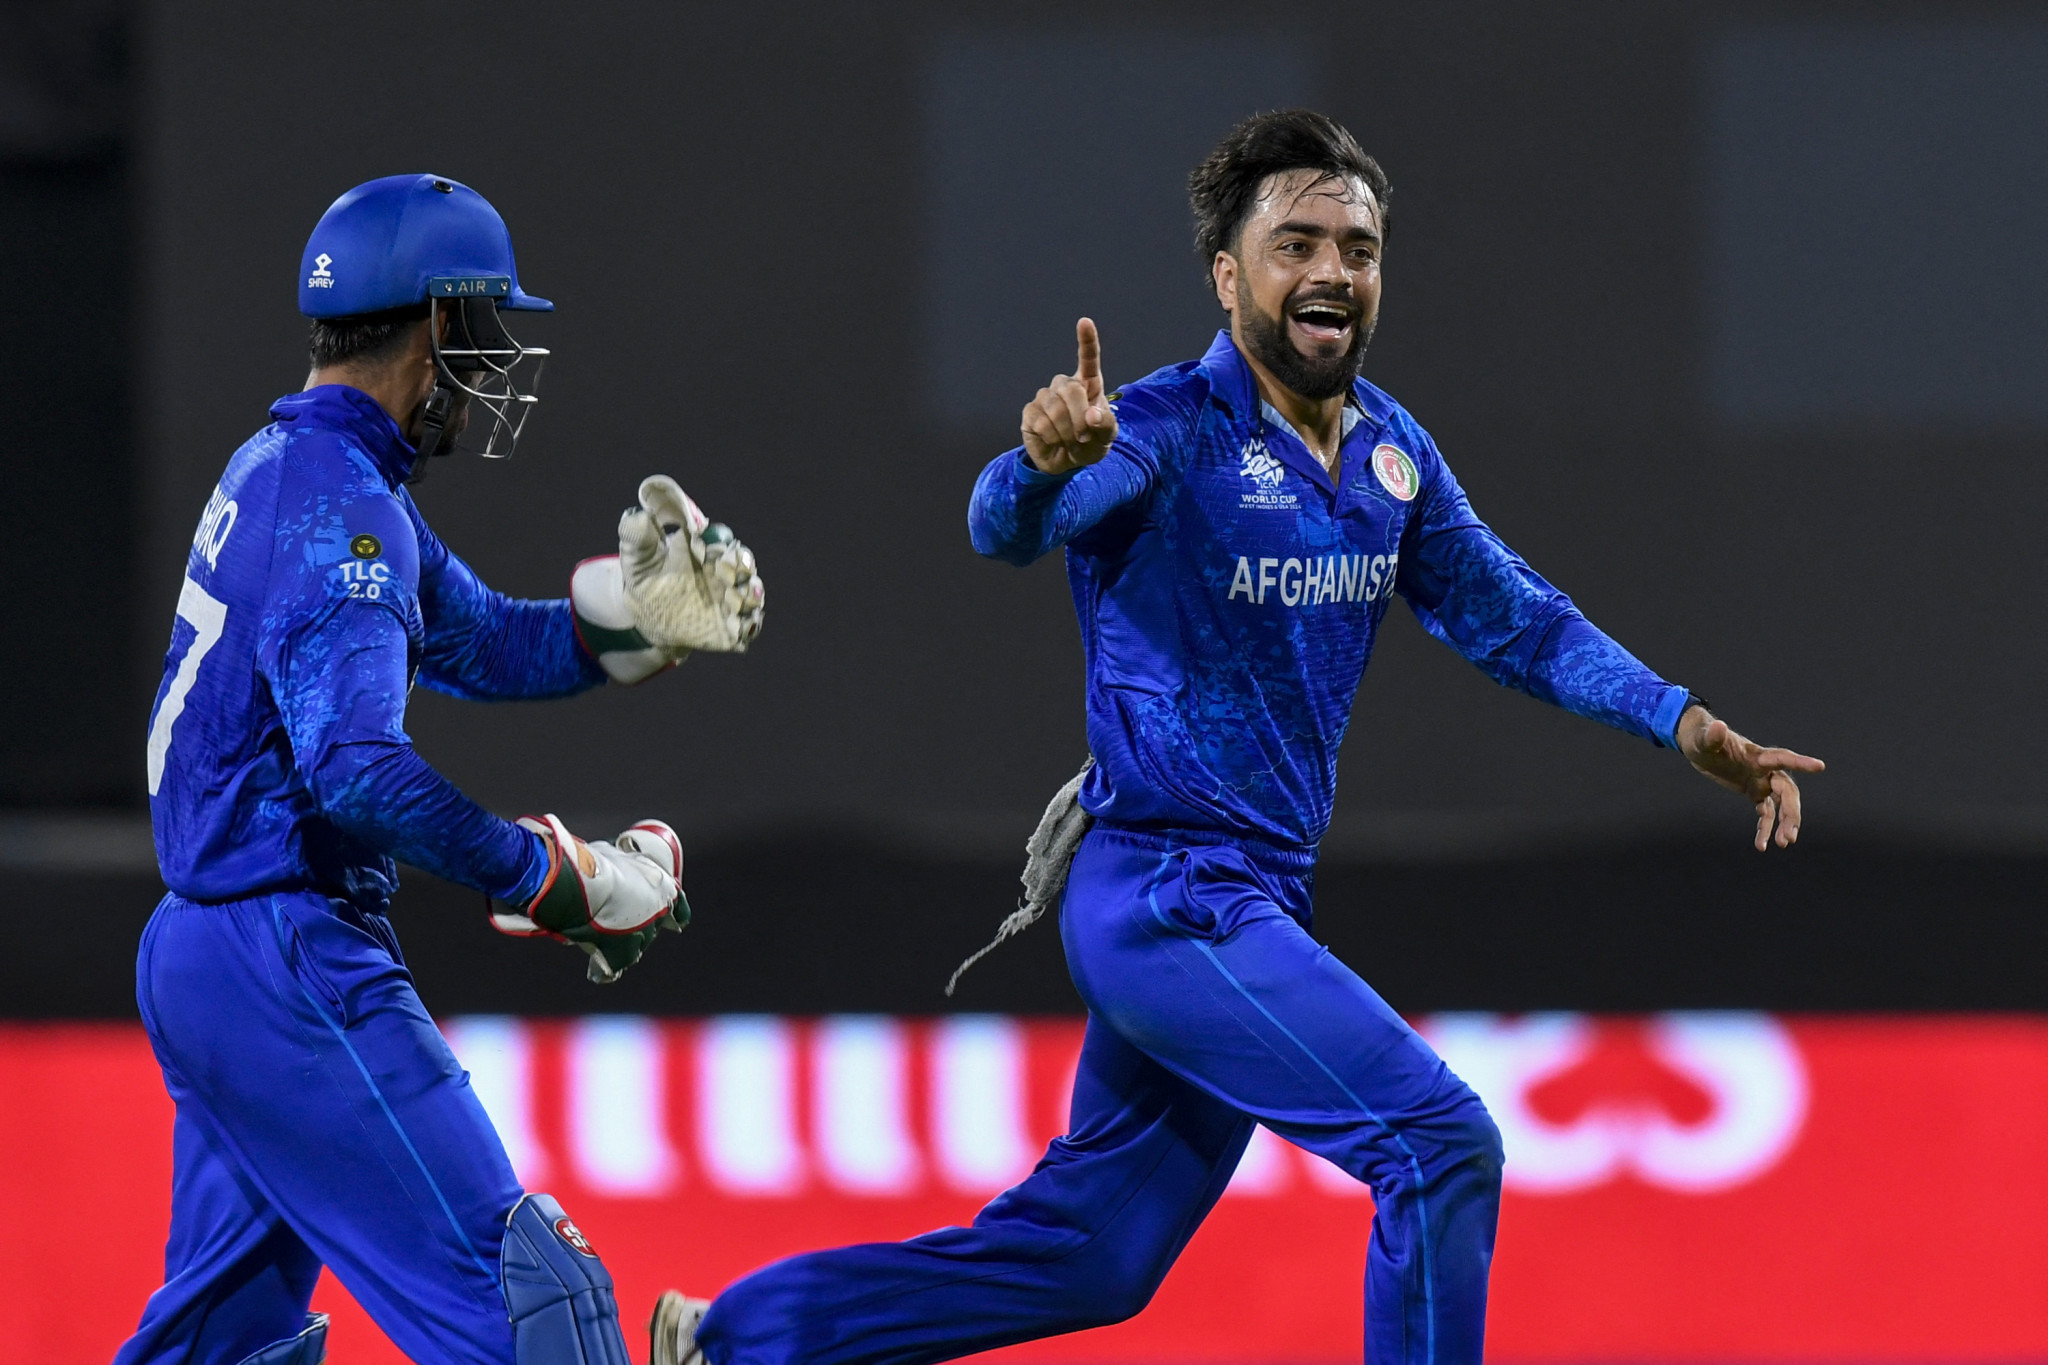 Afghanistan men's team has gained global attention, but women’s cricket in the nation has come under renewed scrutiny. GETTY IMAGES